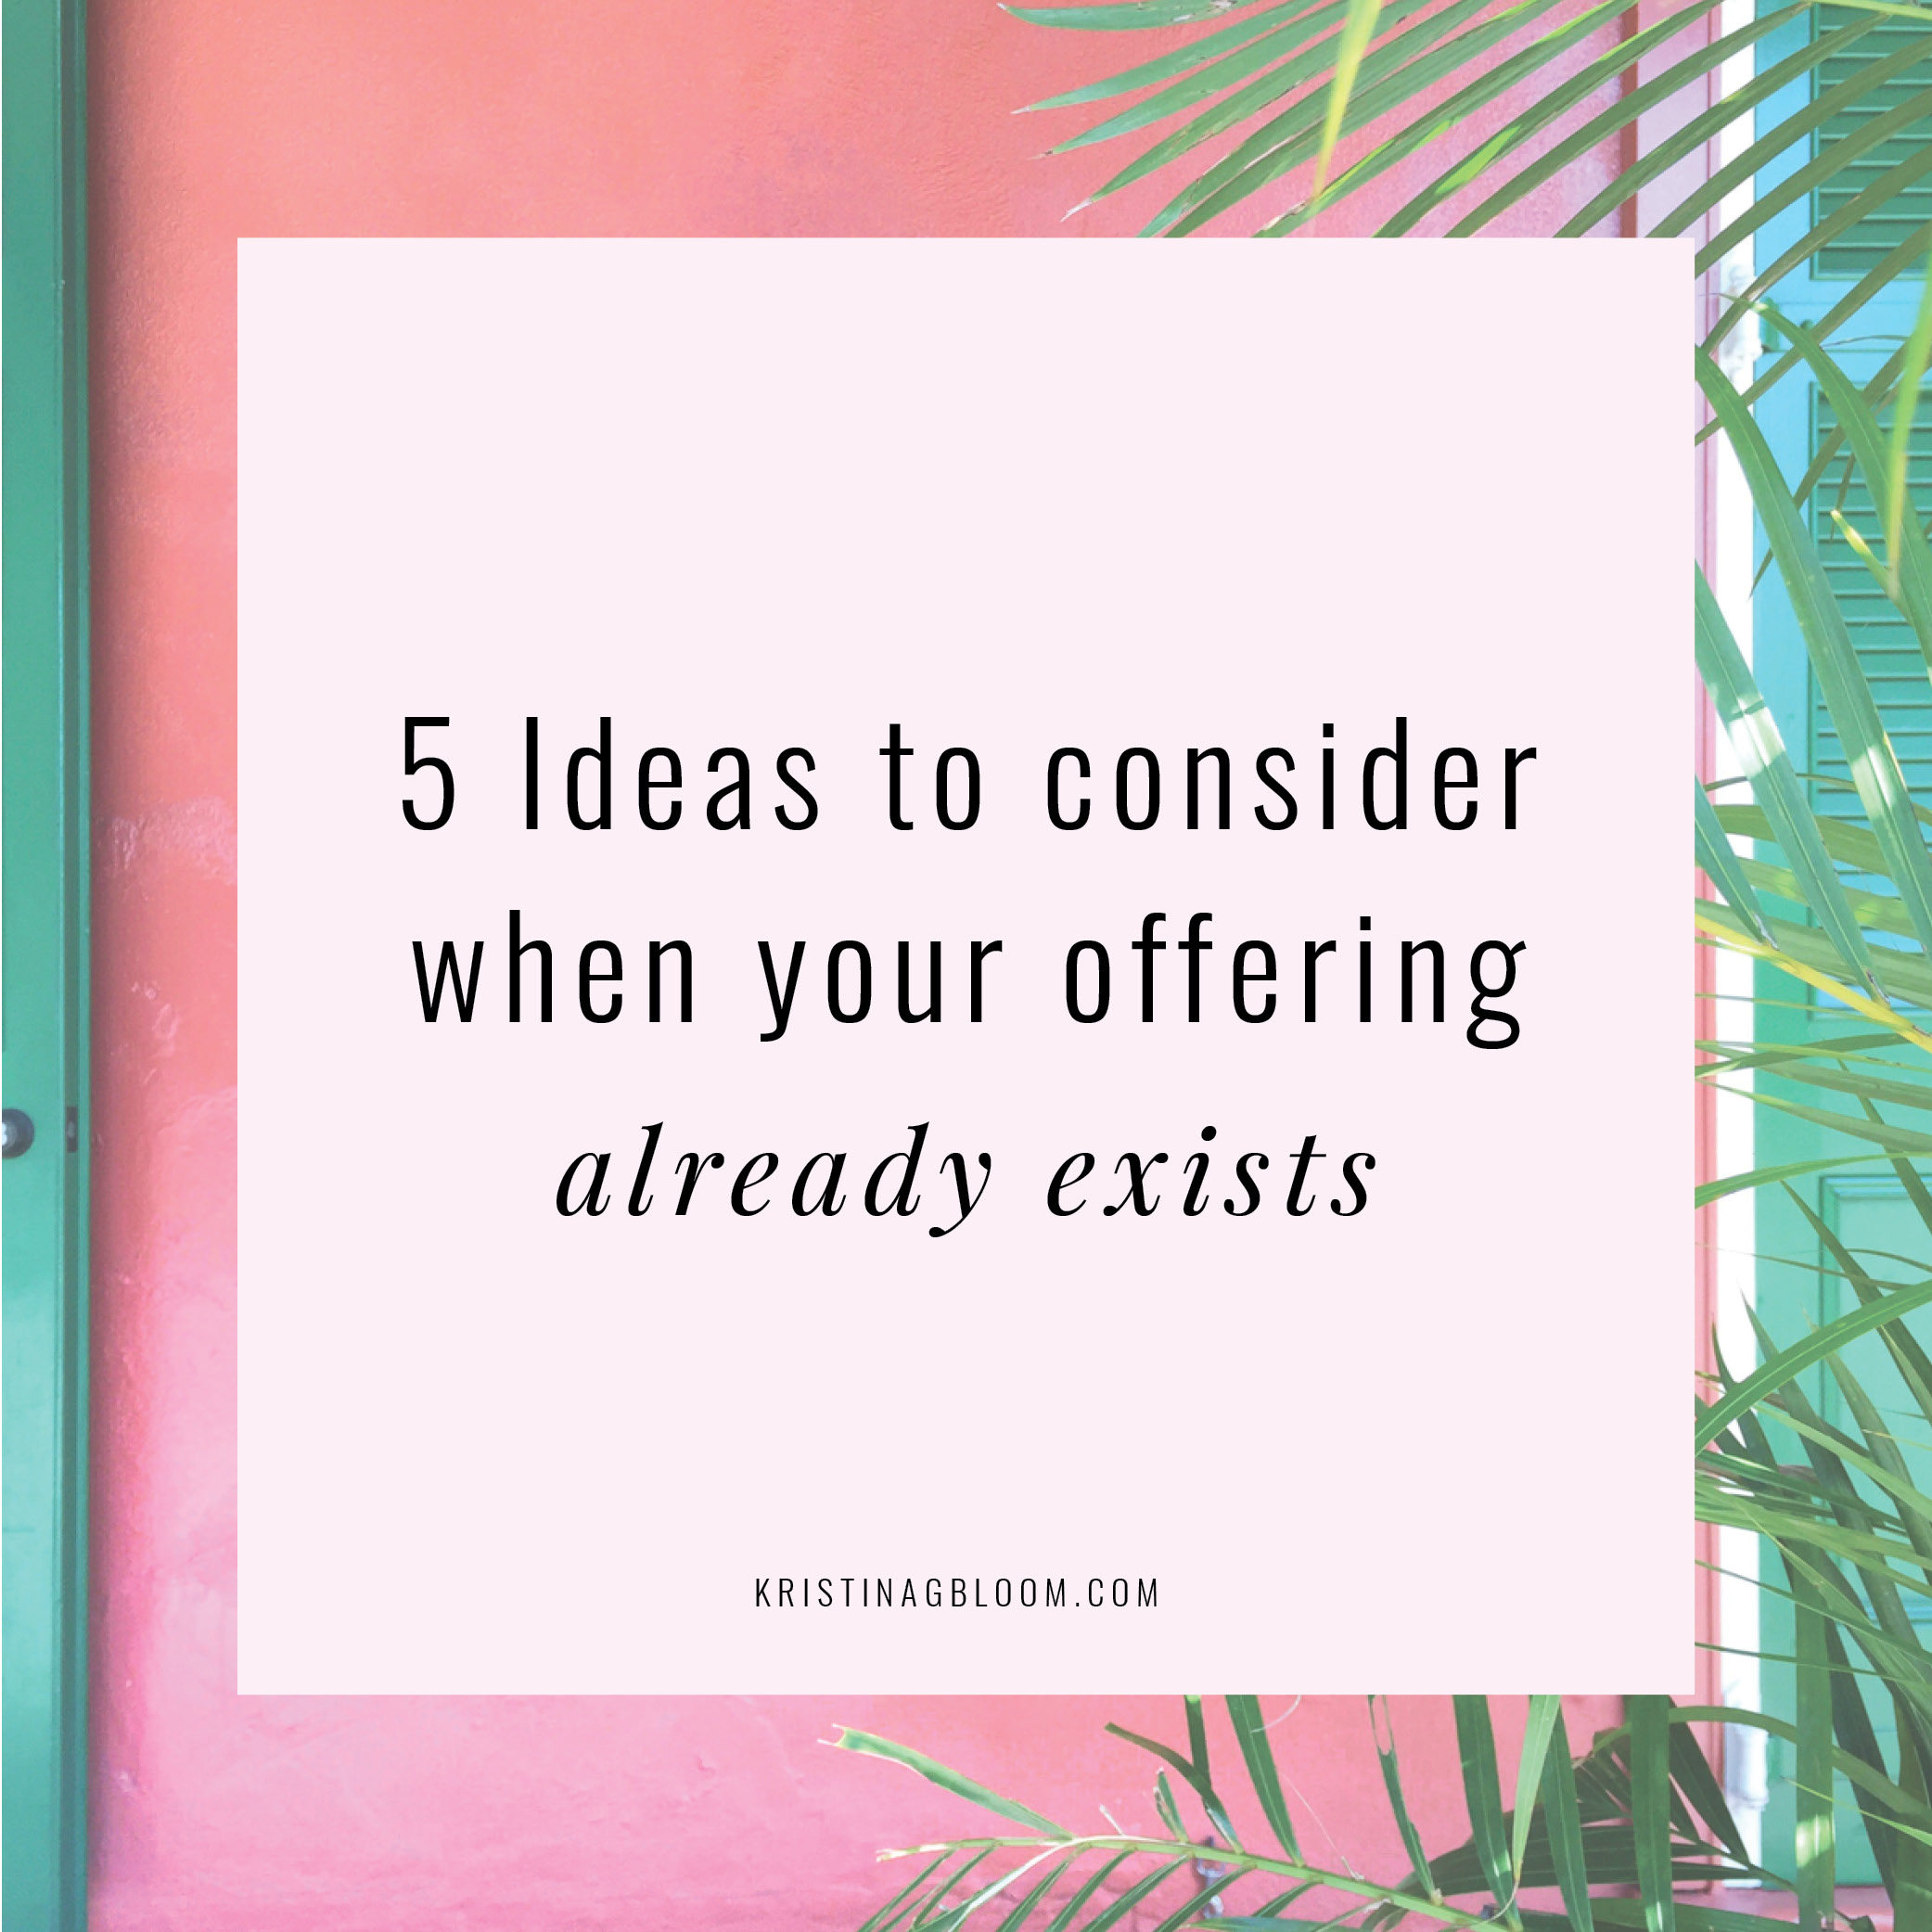 5 Ideas to Consider When your Offering Already Exists